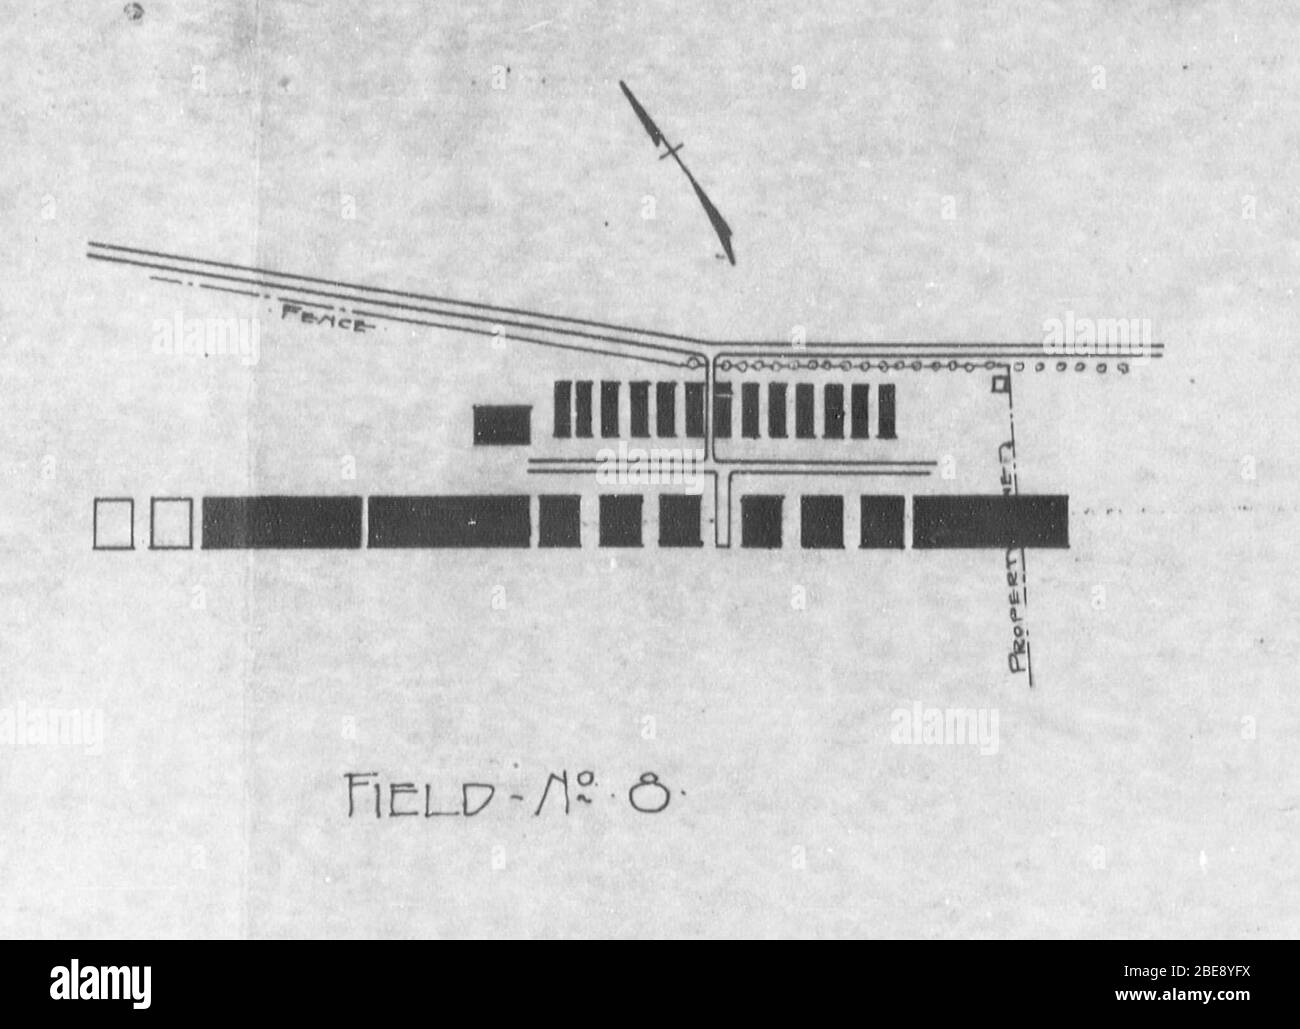 'English: 3d Air Instructional Center - Field 8 - Map; 1918; US National Archives, Gorrell's History of the American Expeditionary Forces Air Service, Series L Miscellaneous Sections of the Air Service  Volume 12 Photostats, Maps, and Photographs Accompanying the History of the Design and Projects Section via http://www.fold3.com; Air Service, United States Army photograph; ' Stock Photo